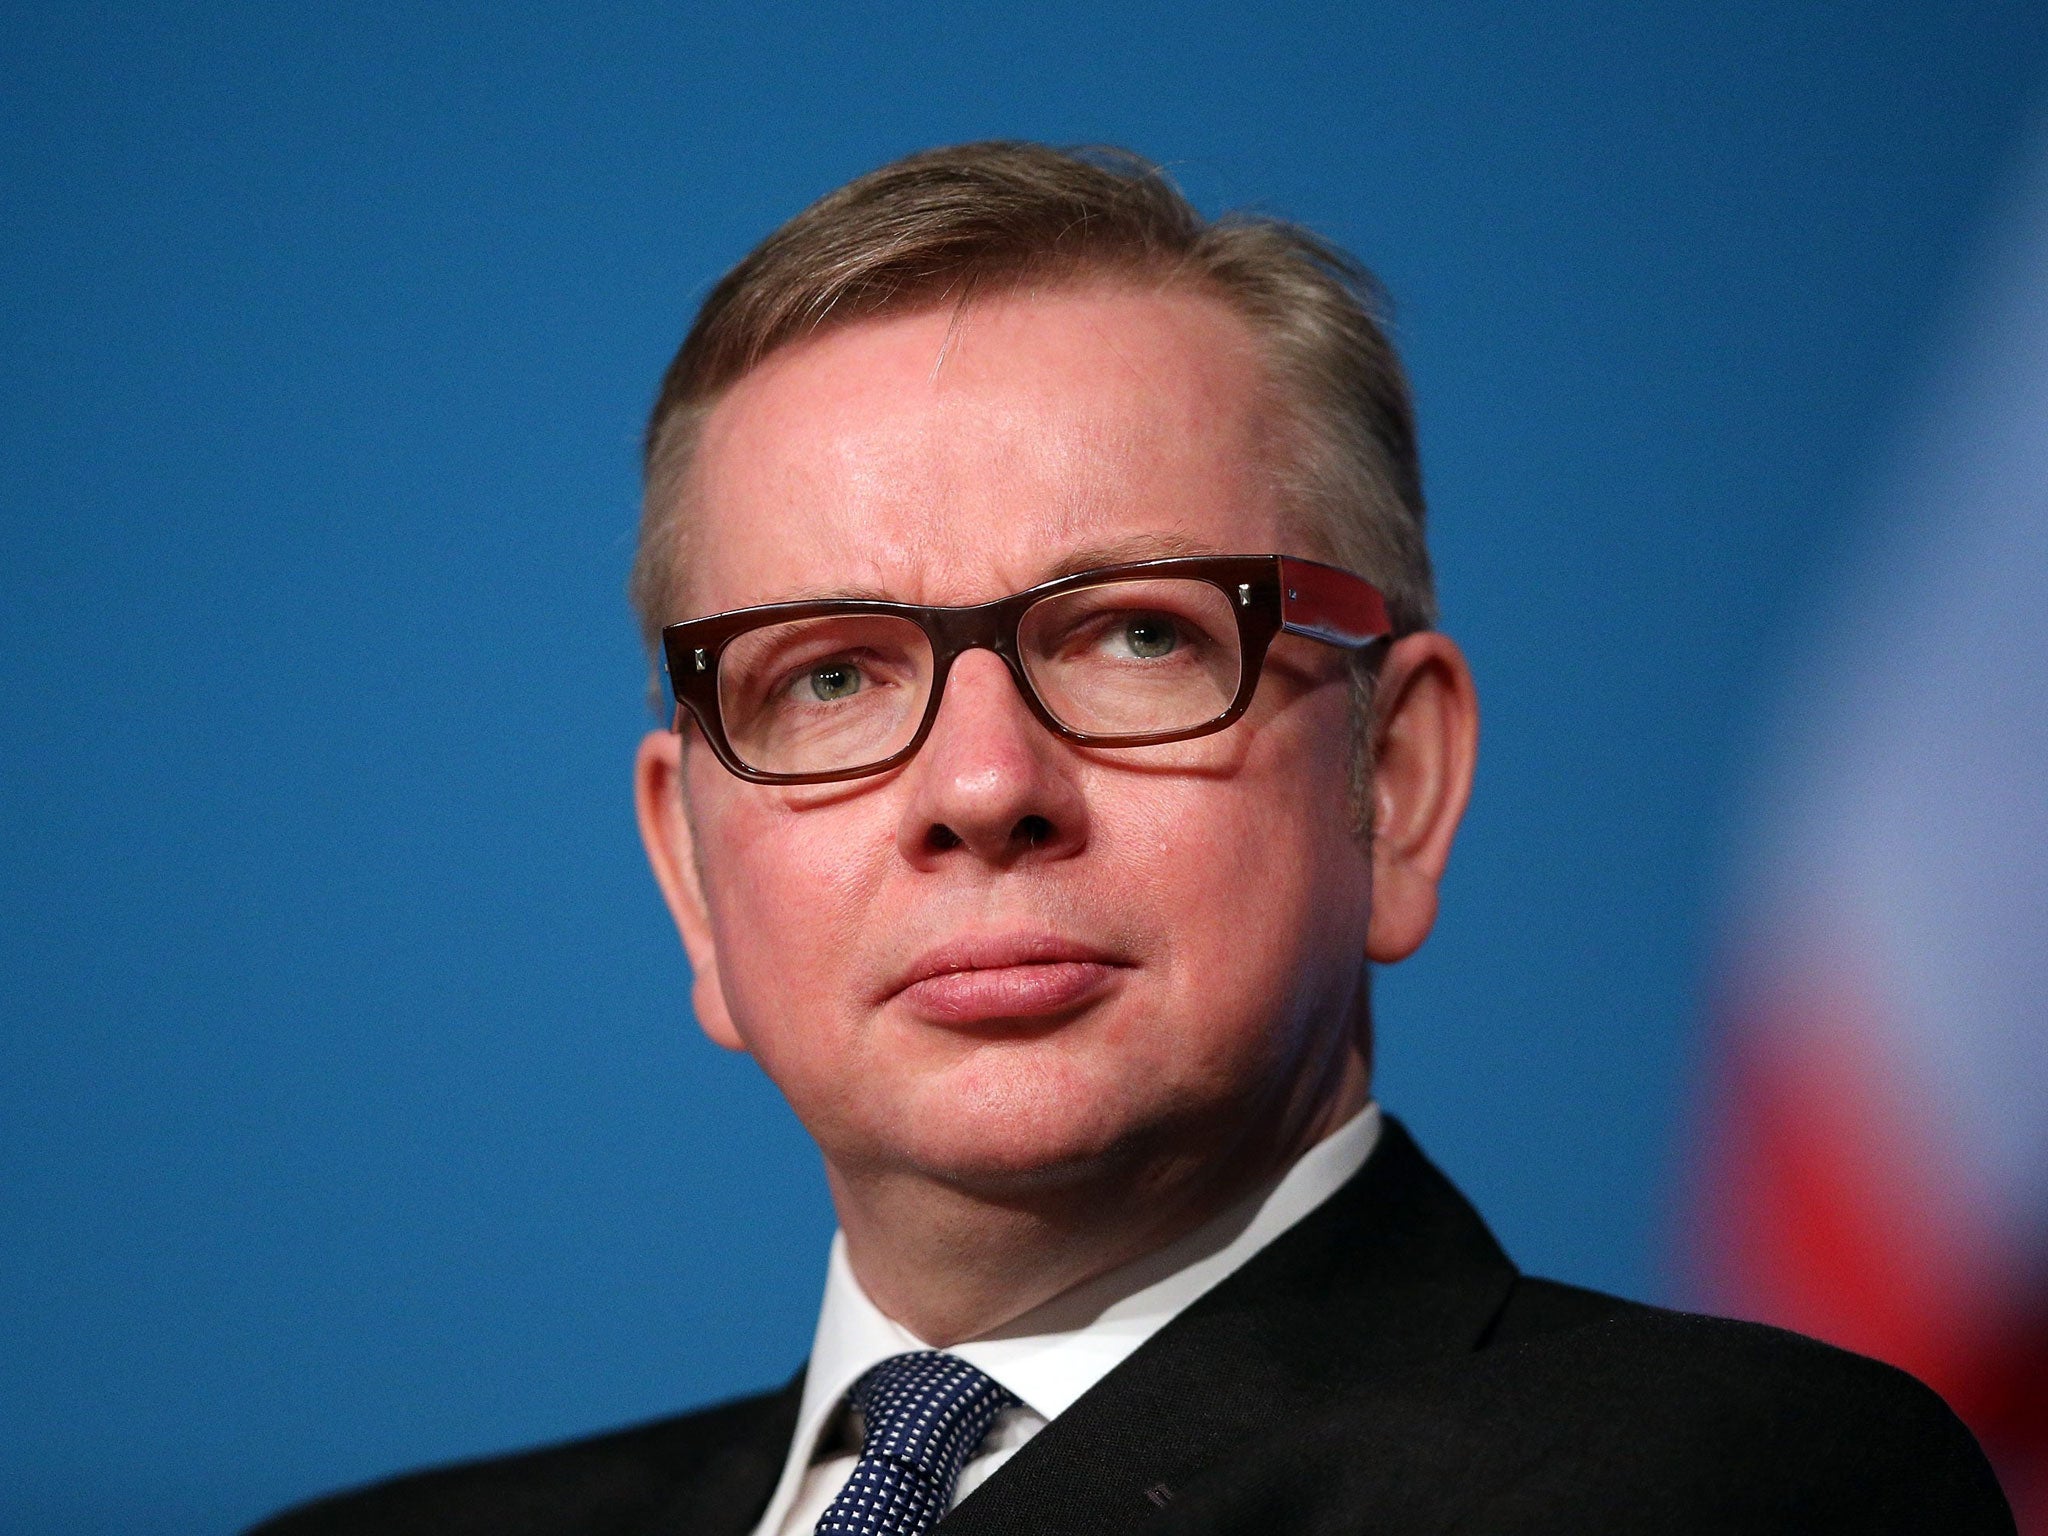 Michael Gove's A-level reforms are in danger of wrecking government plans to persuade more disadvantaged students to go to university